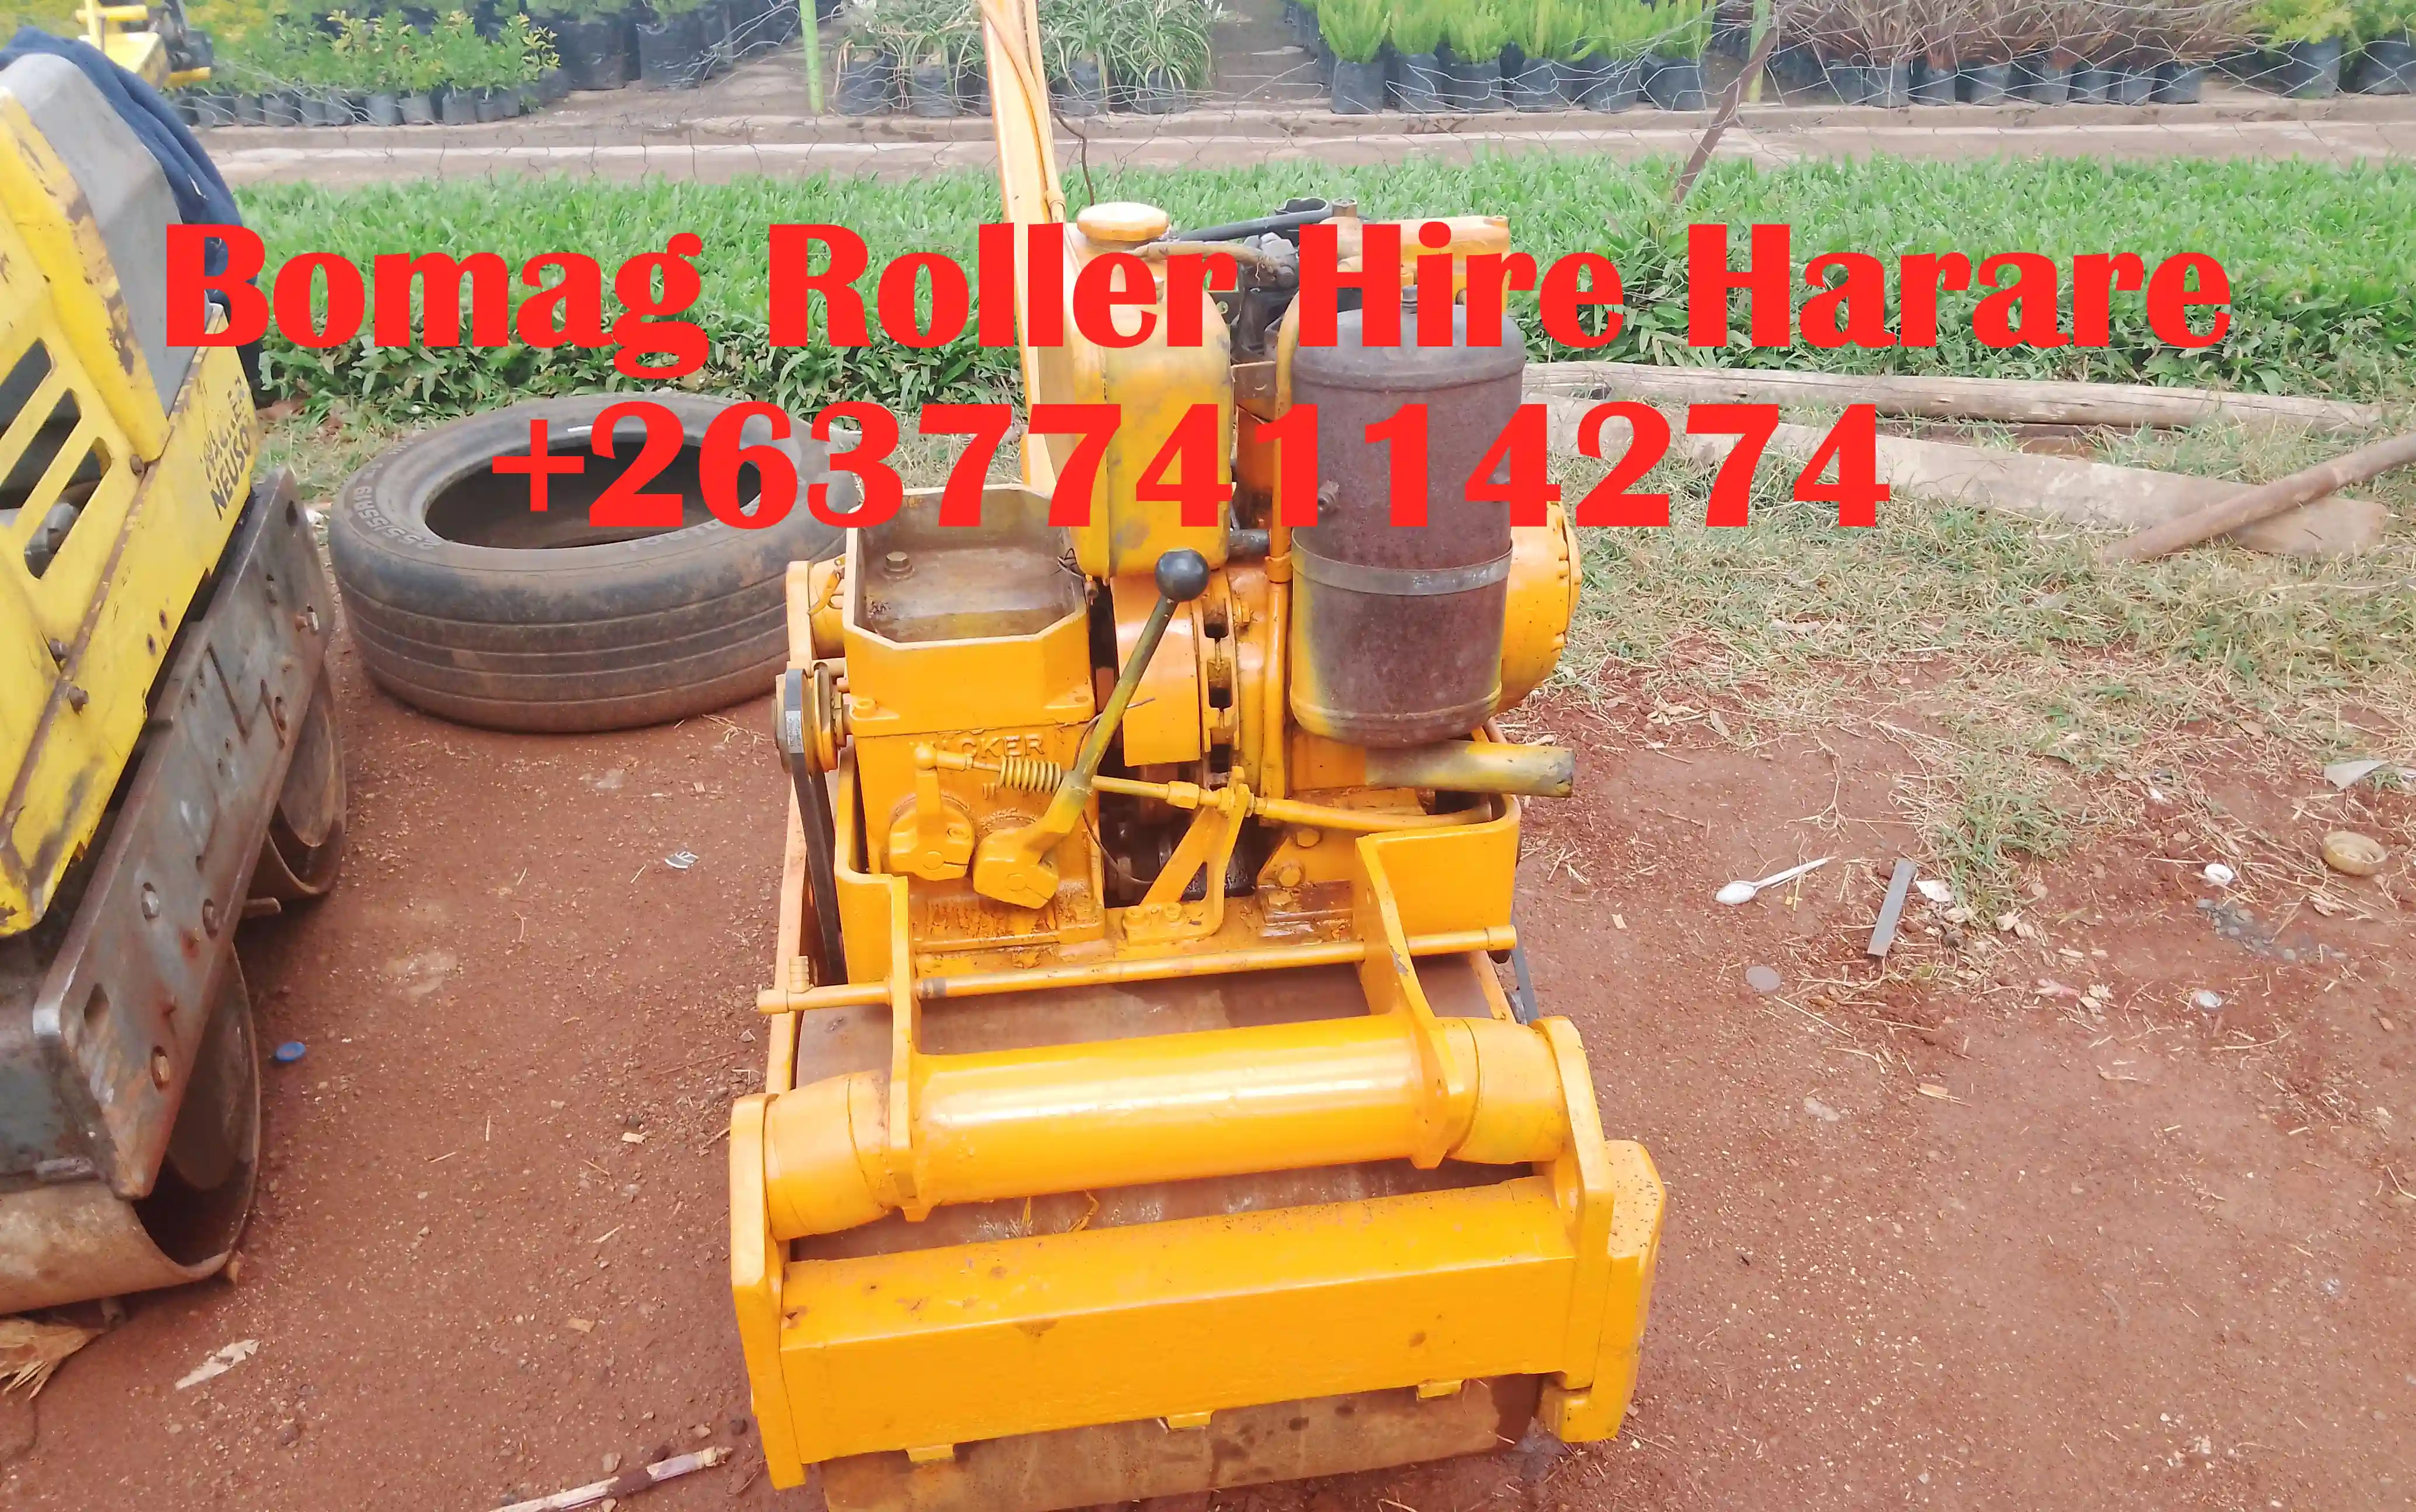 Bomag Roller Hire Harare | 0774114274